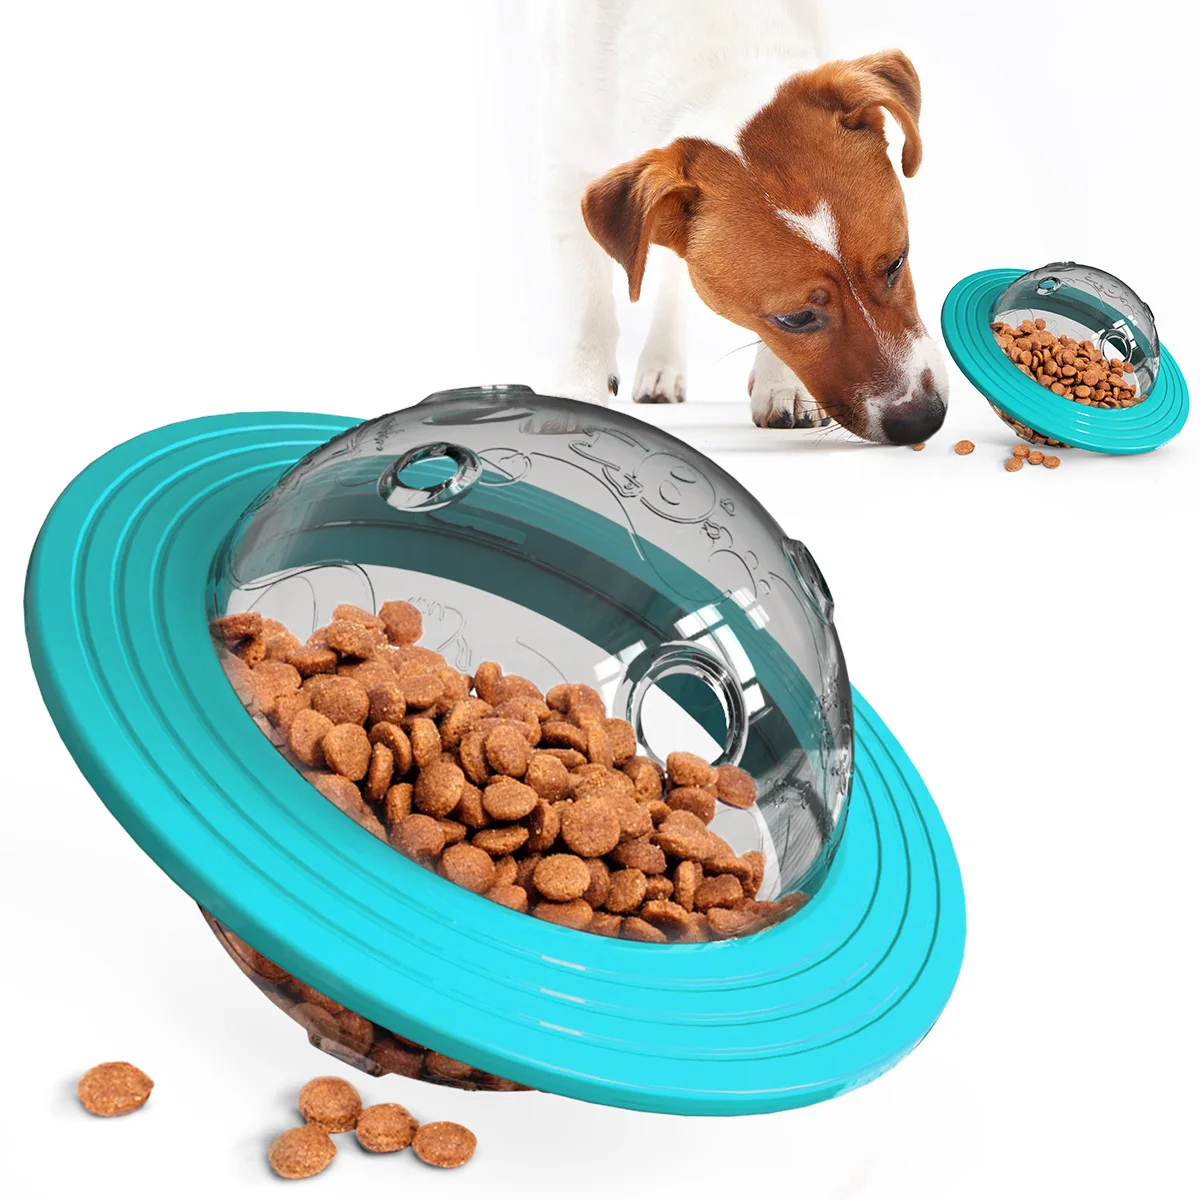 

High Quality Pet Dog Food Feeder Ufo Ball Toy Puppy Flying Disk Food Dispenser Ball Dog Ball Toy, Blue,yellow